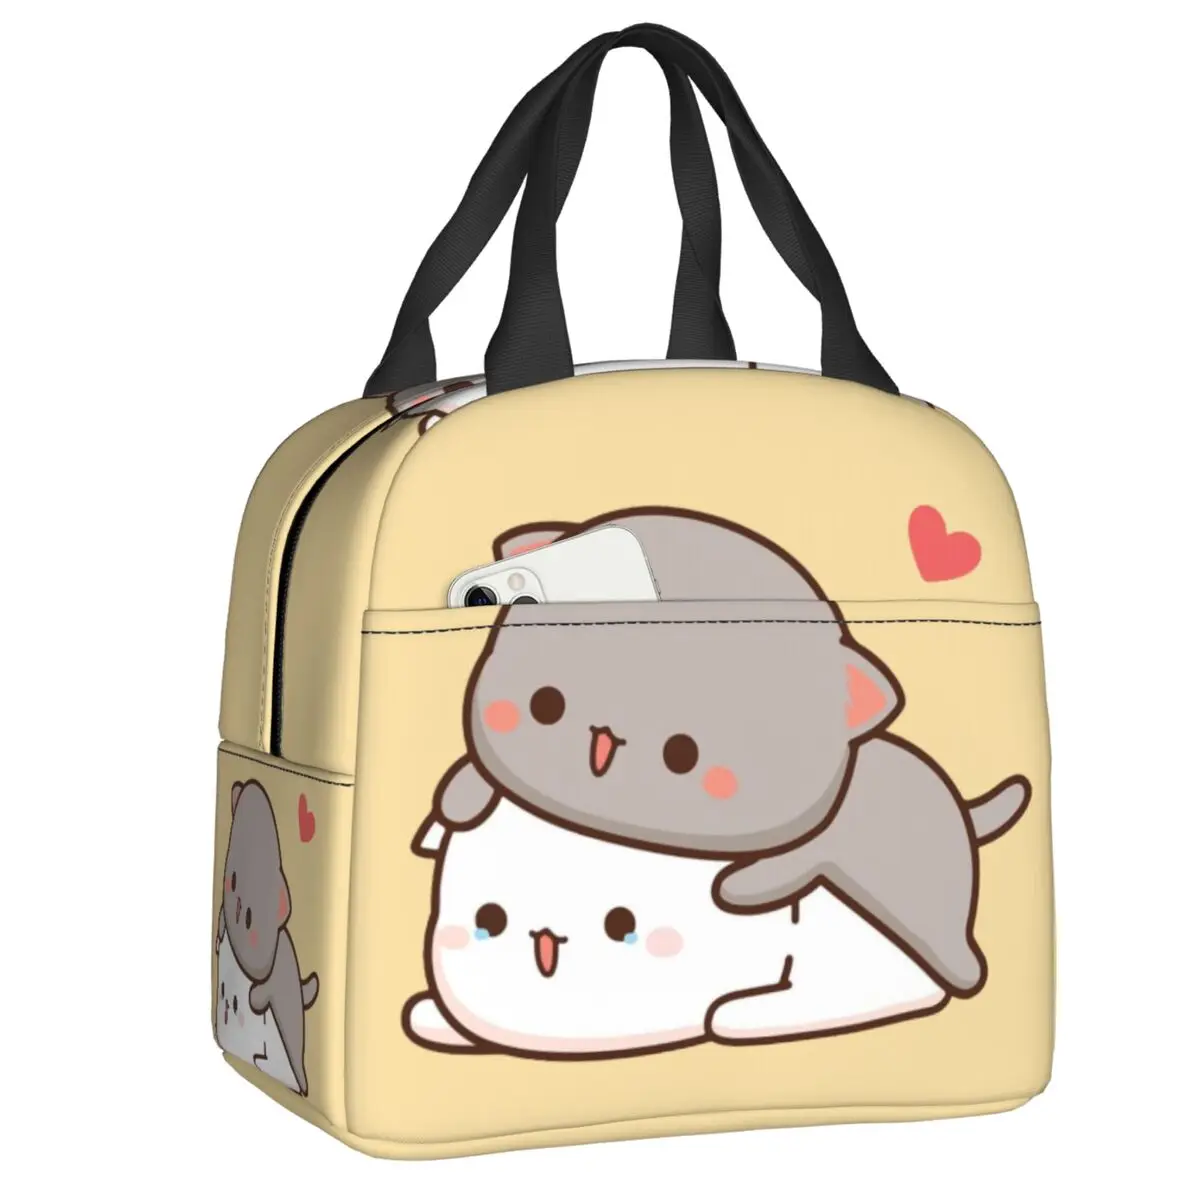 Peach And Goma Lunch Box Portable  Leakproof Thermal Cooler Food Insulated Couple Mochi Cat Lunch Bag For Women School Children